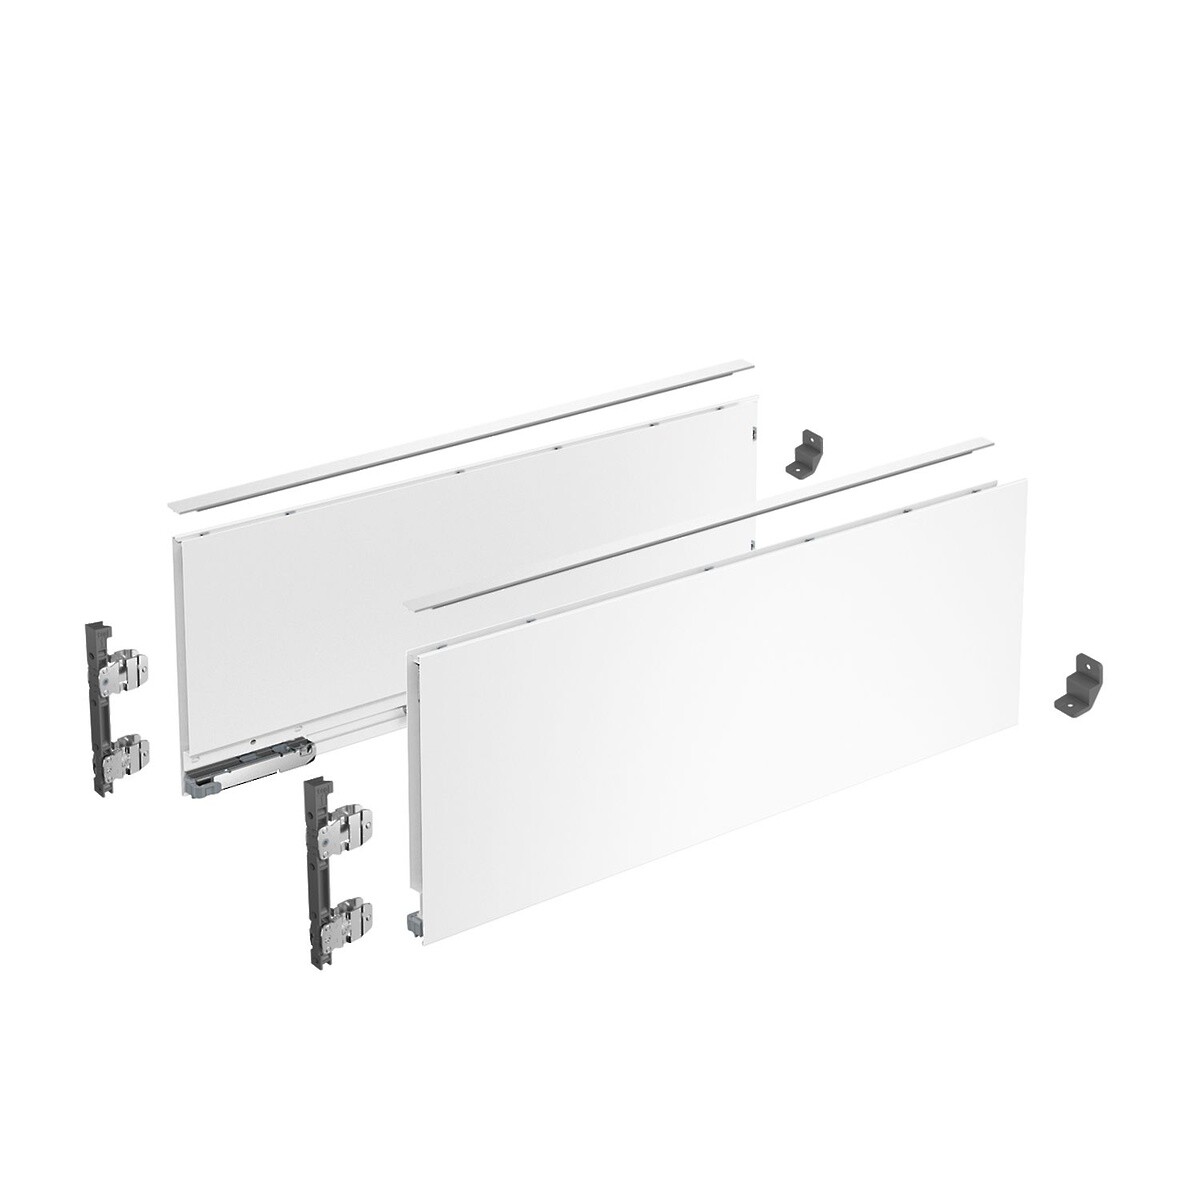 AvanTech YOU Drawer side profile set, height 187 mm x NL 300 mm, White, Left and Right